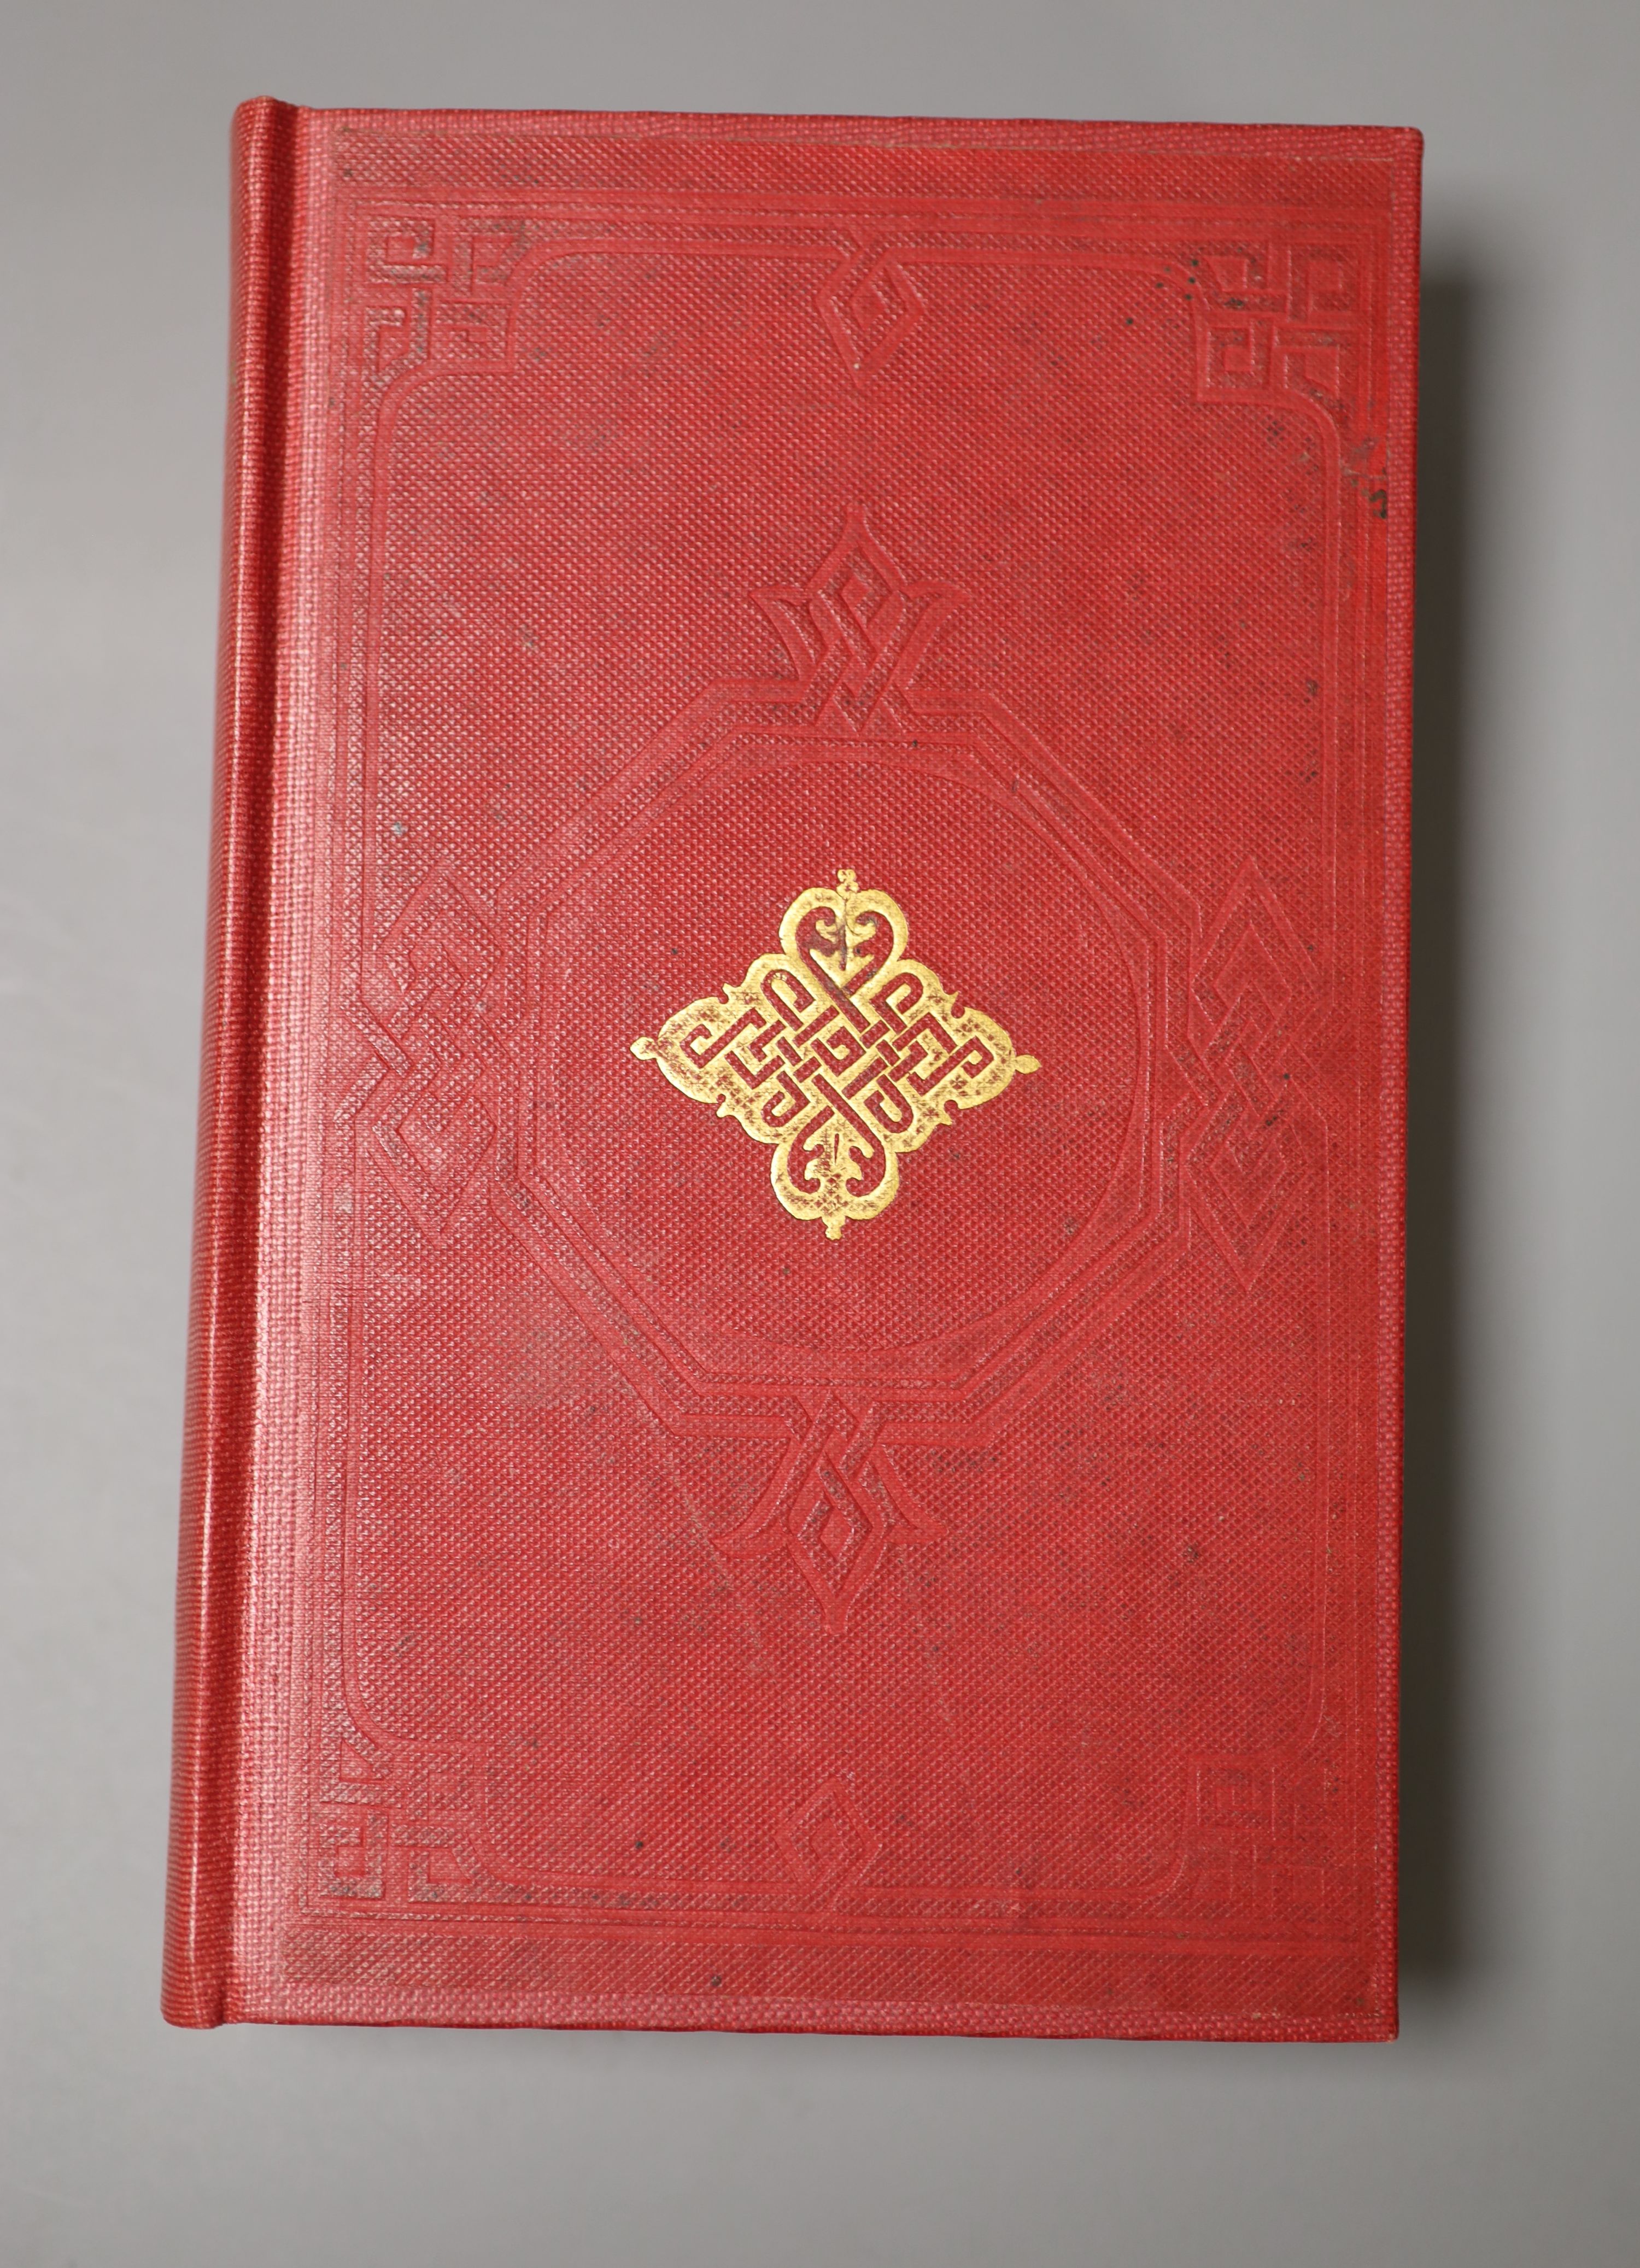 Jardine, William, Sir (editor) - The Naturalists’ Library, Ornithology. Birds of Great Britain and Ireland, 8vo, rebound red cloth gilt, front boards retained, end papers renewed, vols I, 11, 111, V, VI, and VII, with po